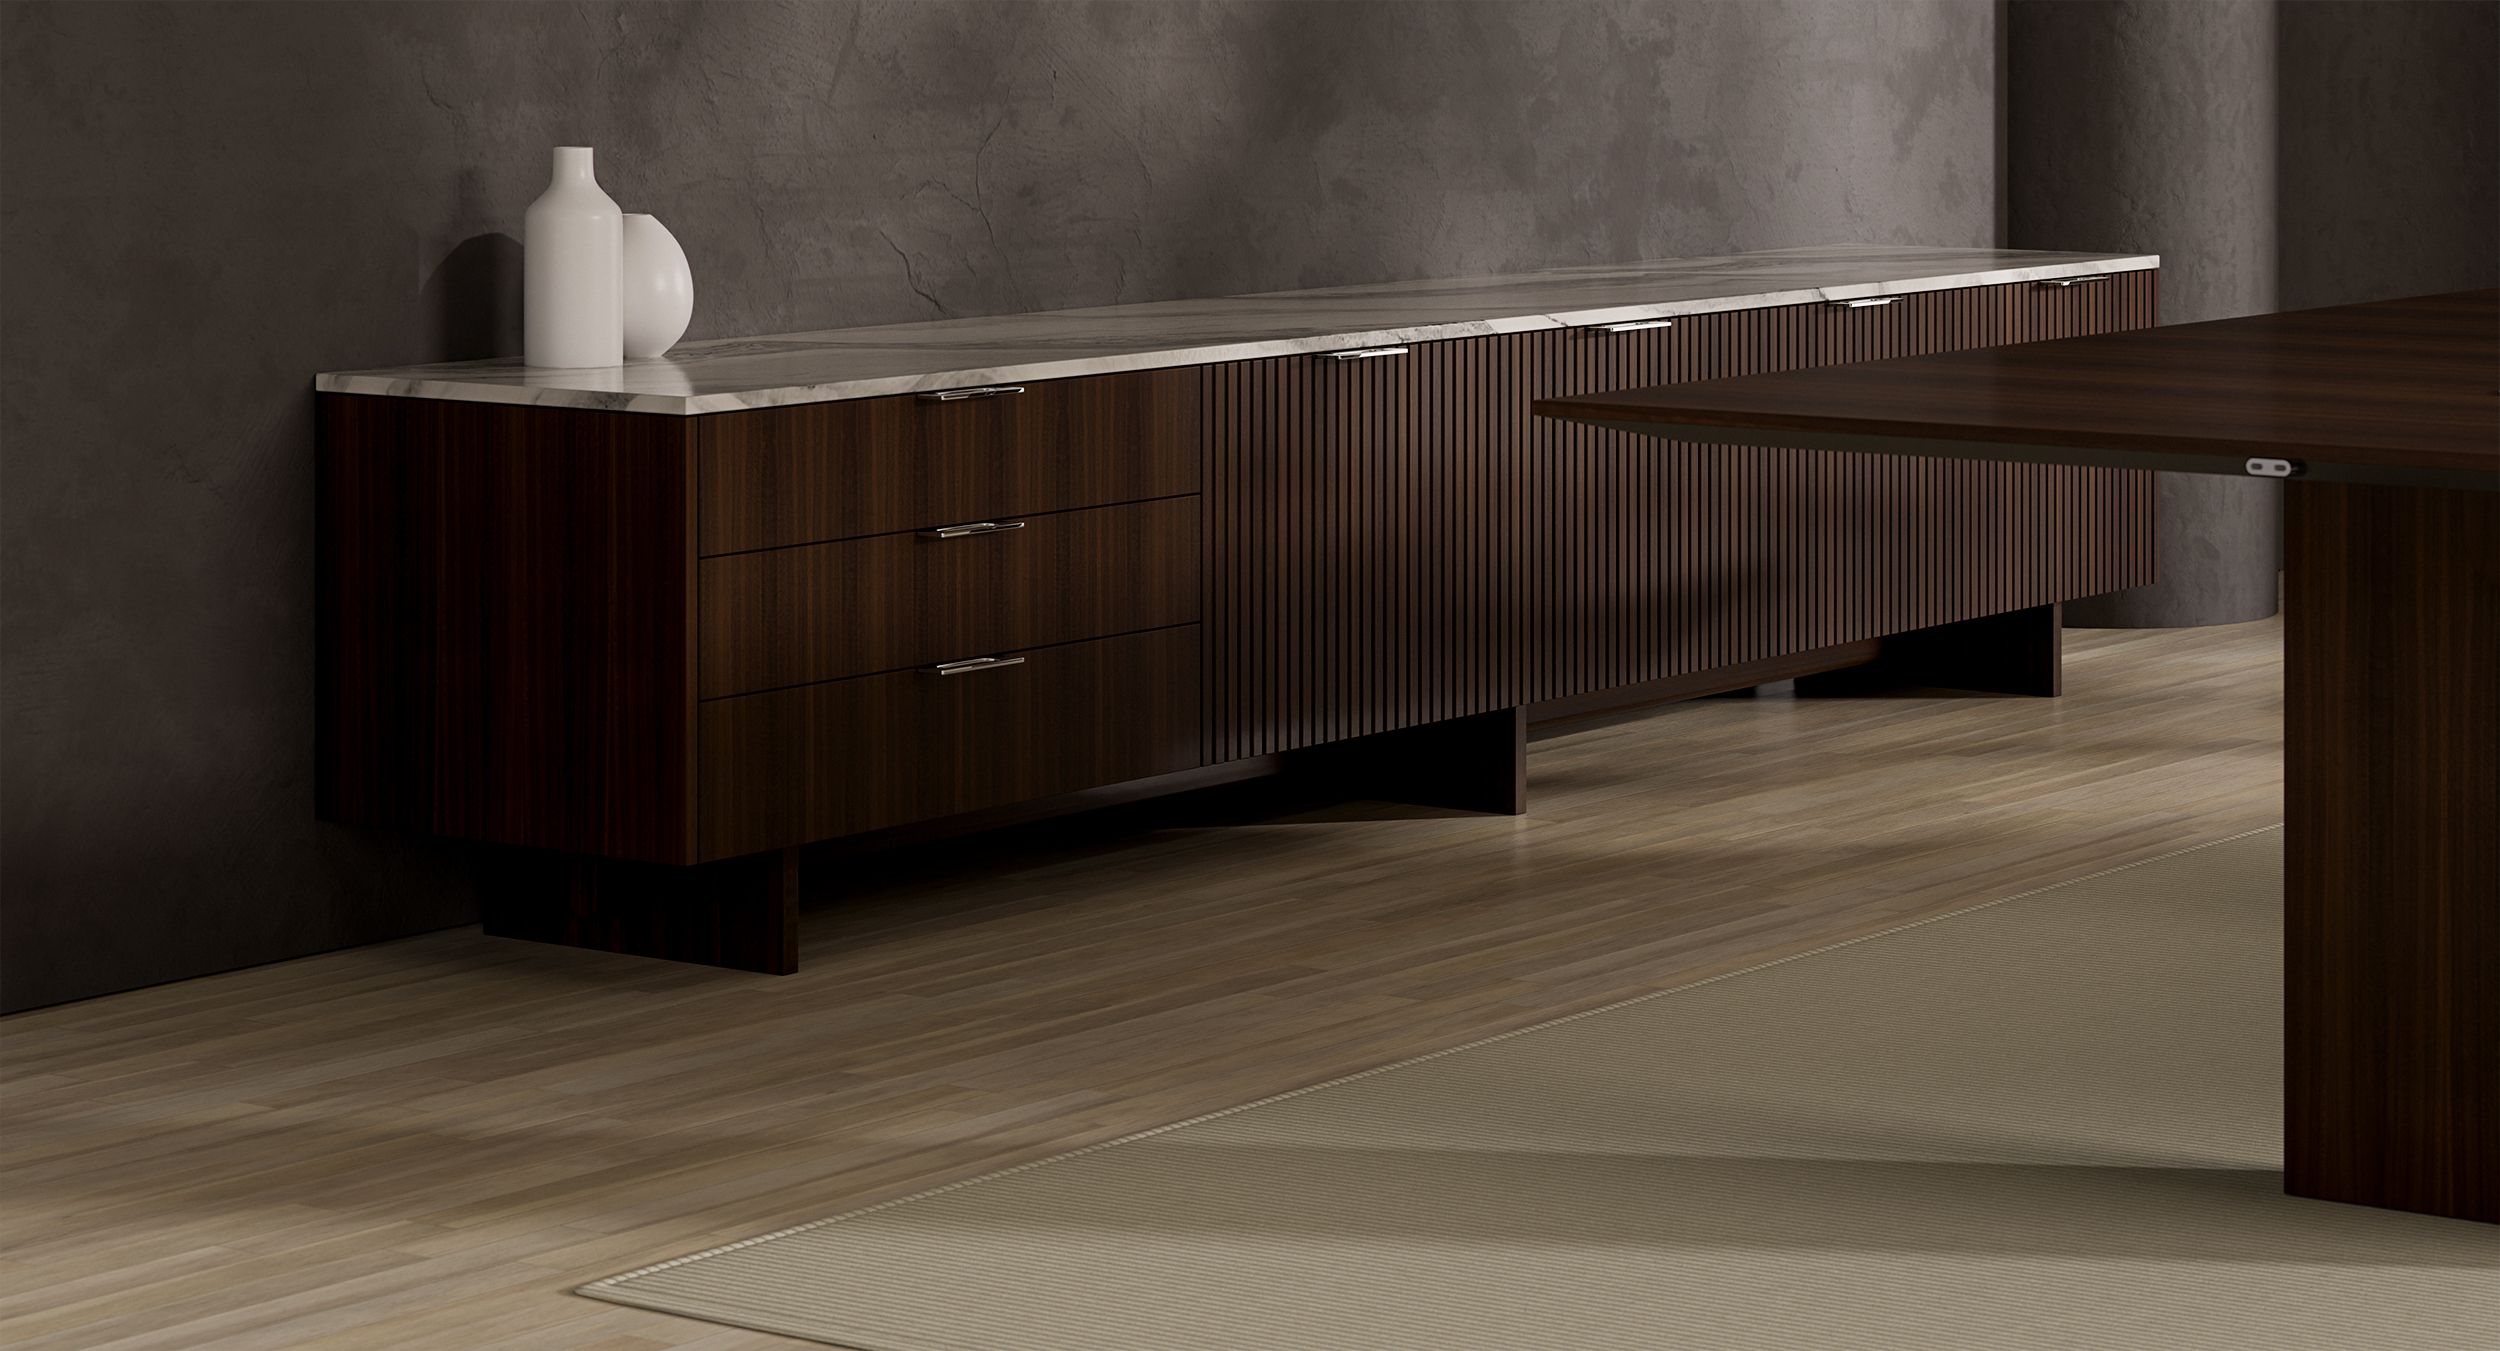 Perfectly sequence-matched wood veneer sideboards are offered with slatted fronts for elevated warmth and texture.